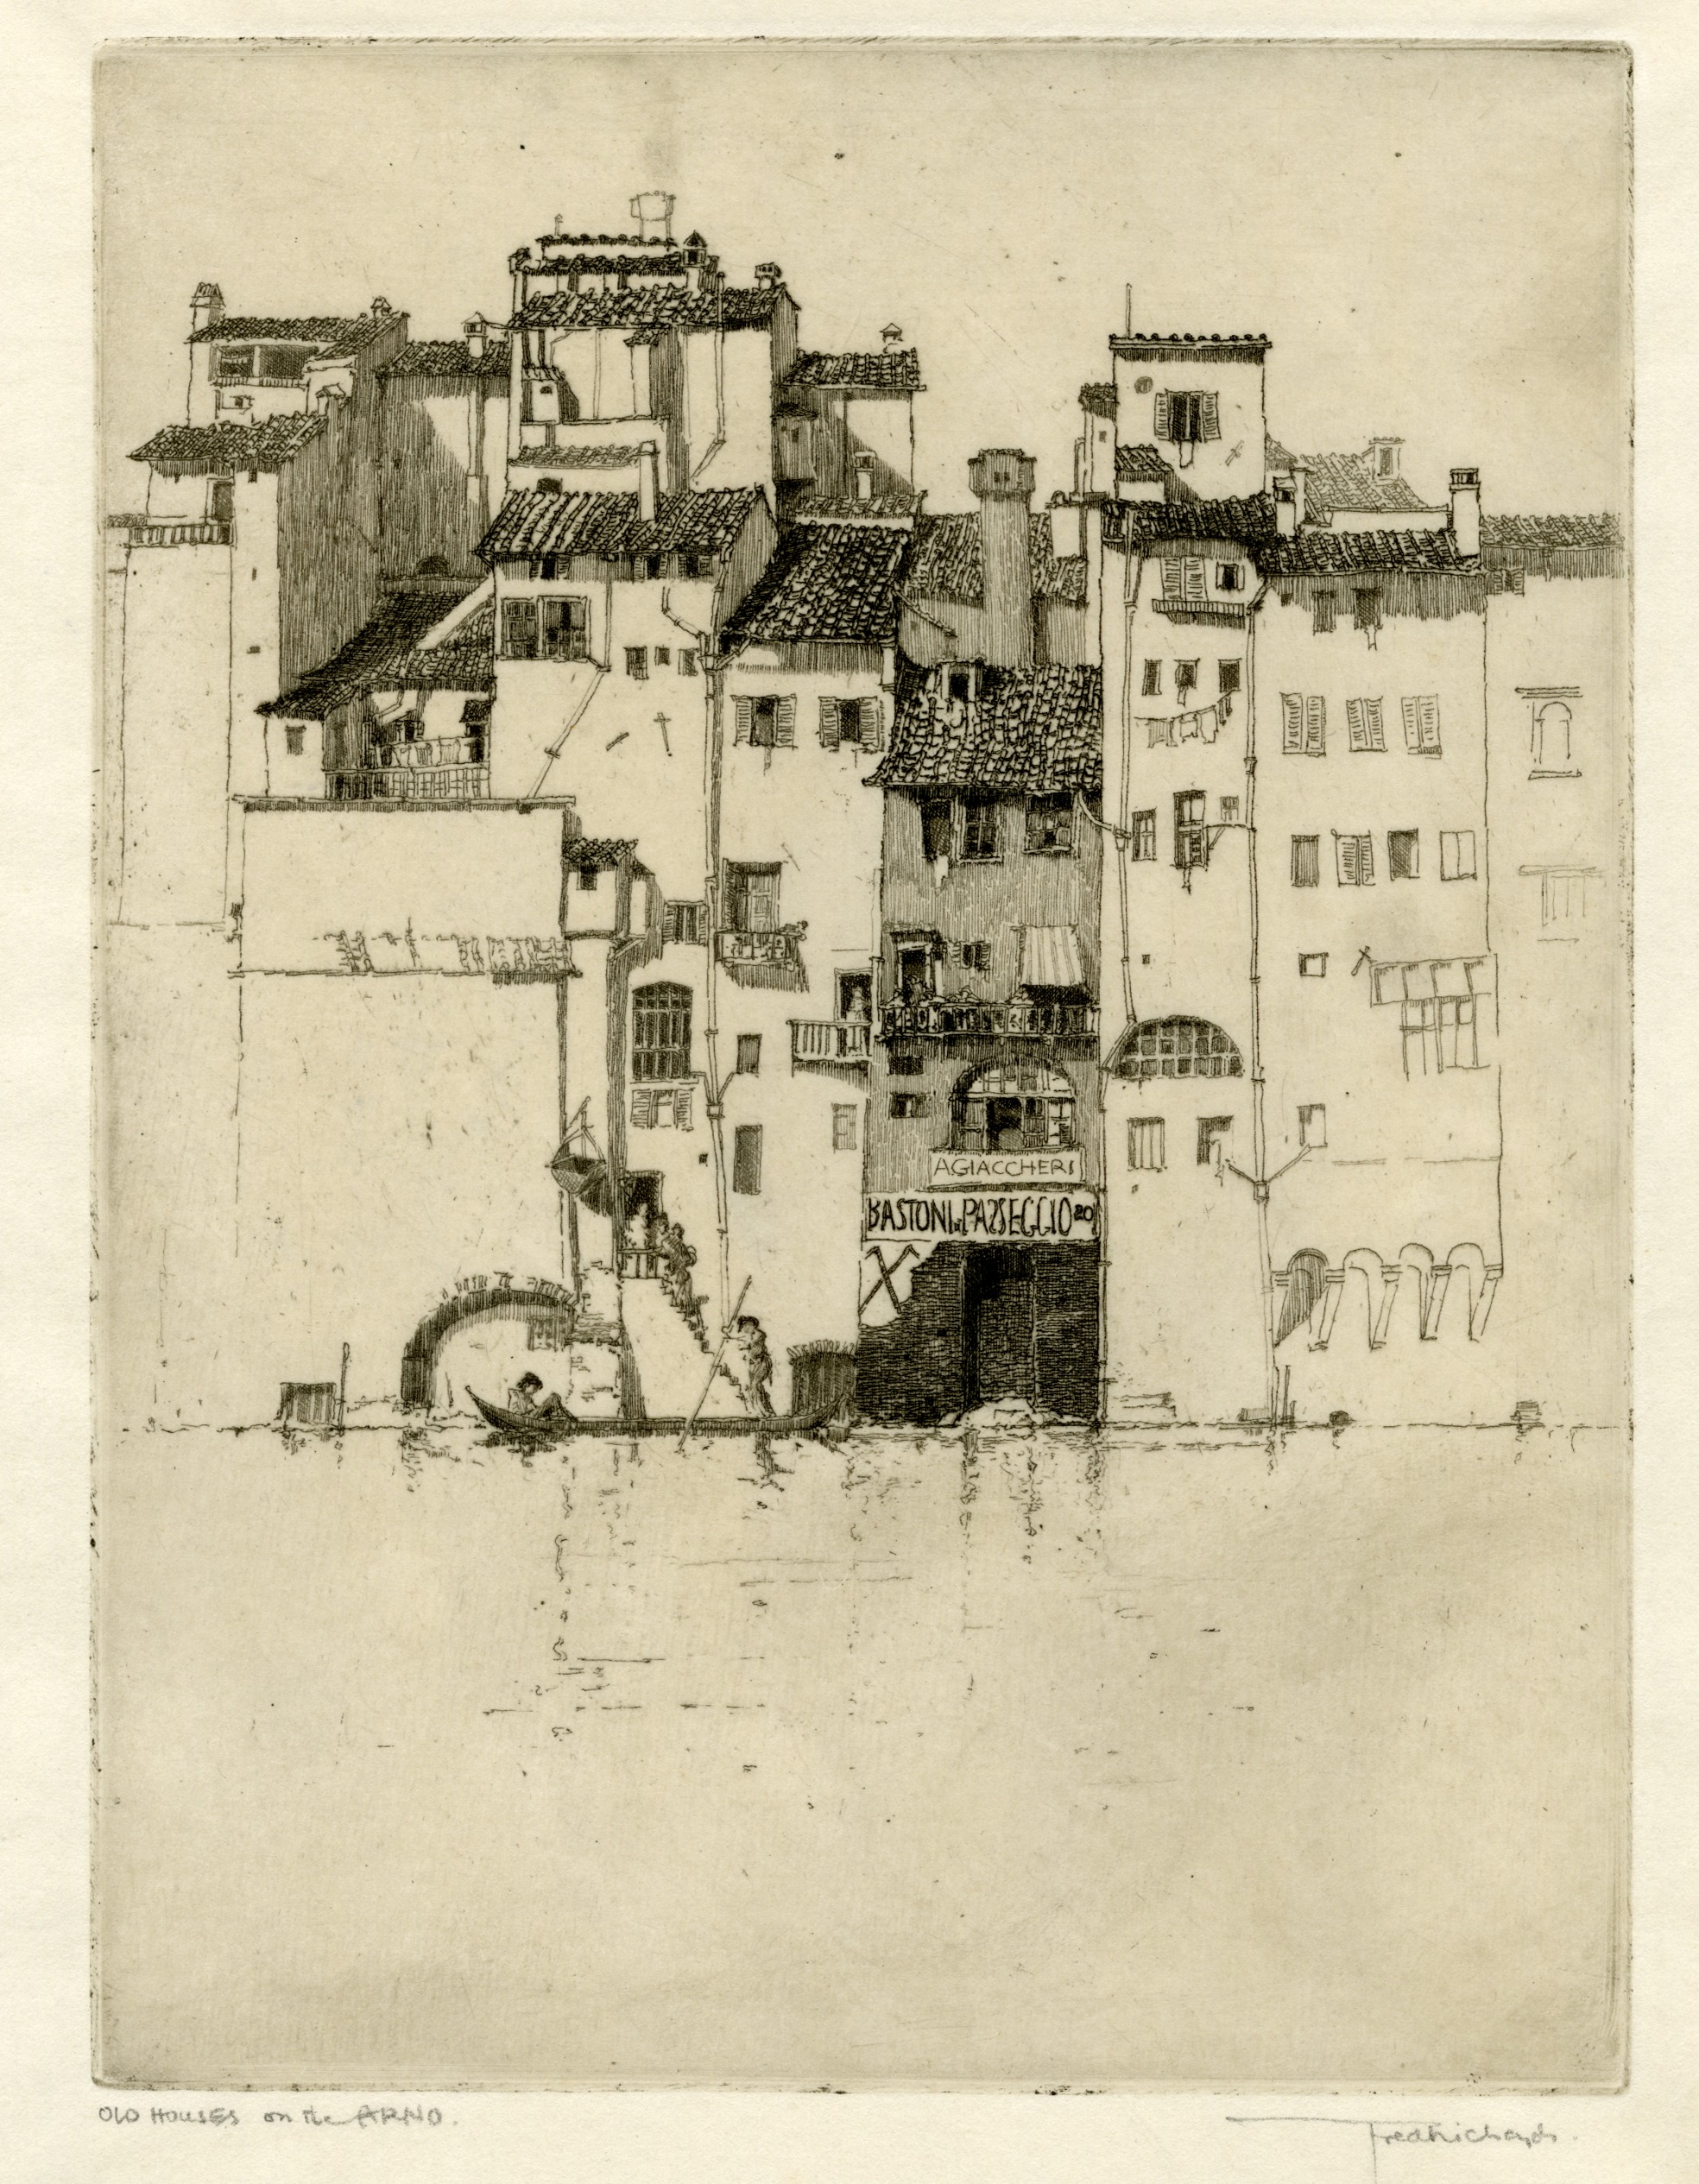 Old houses on the Arno (1926)